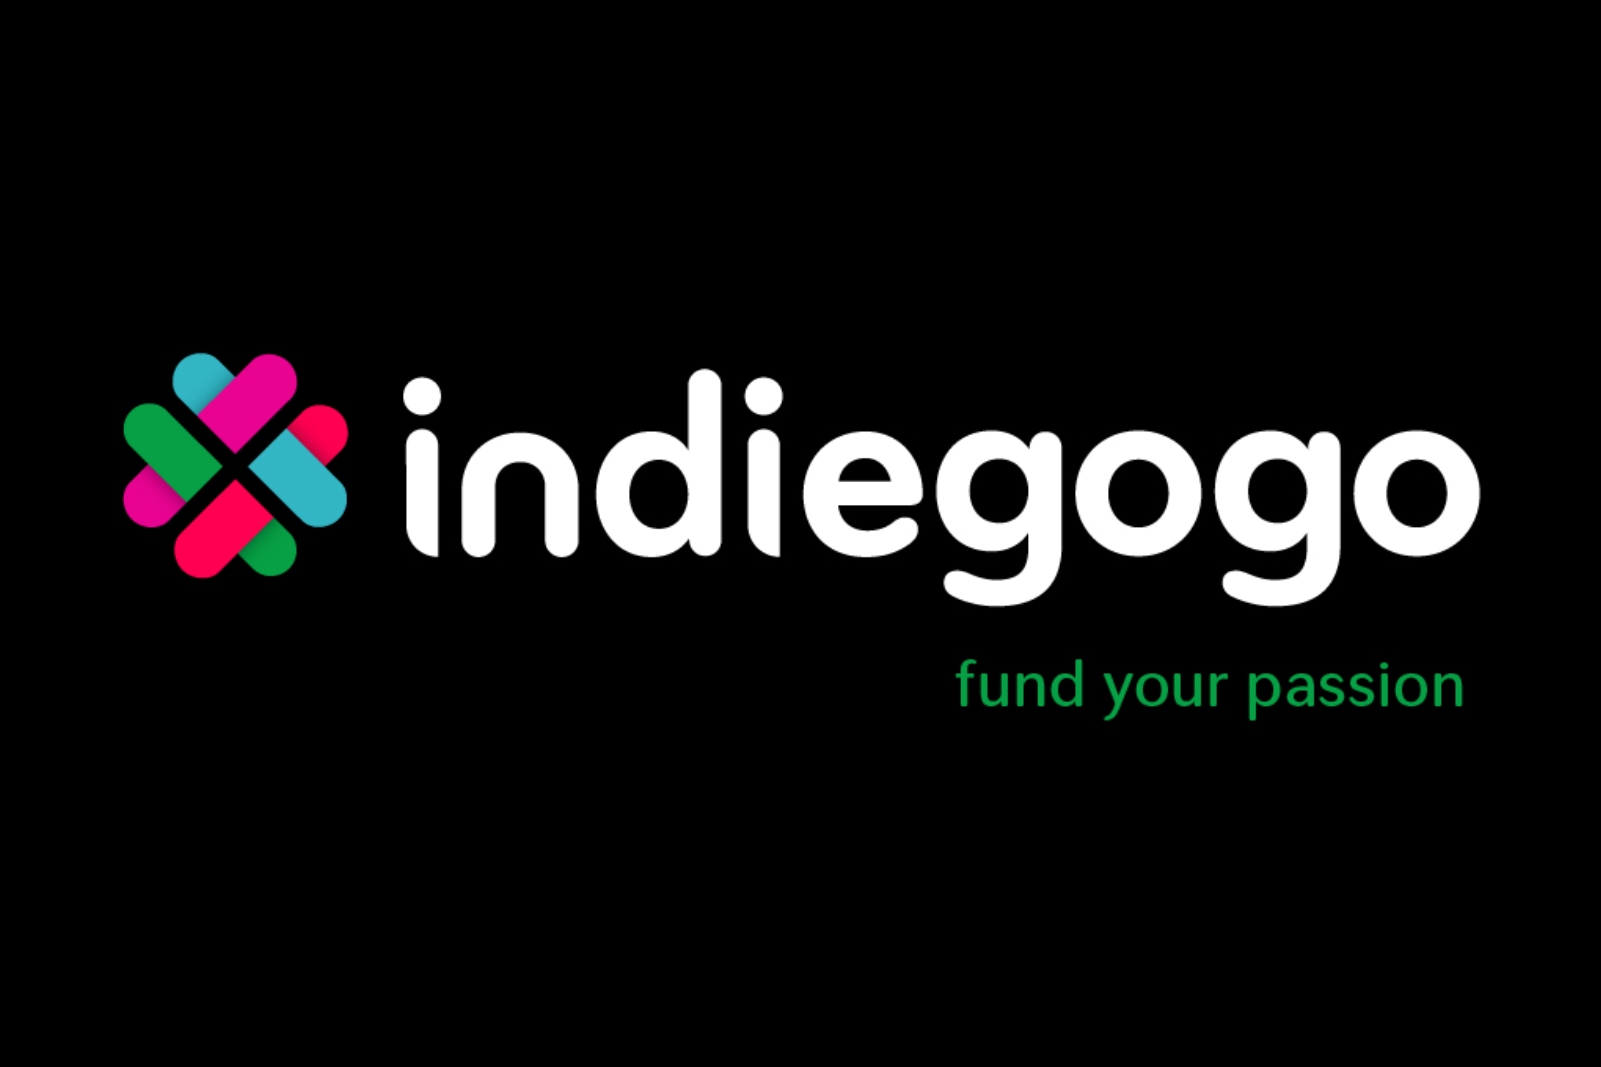 What Is Indiegogo?